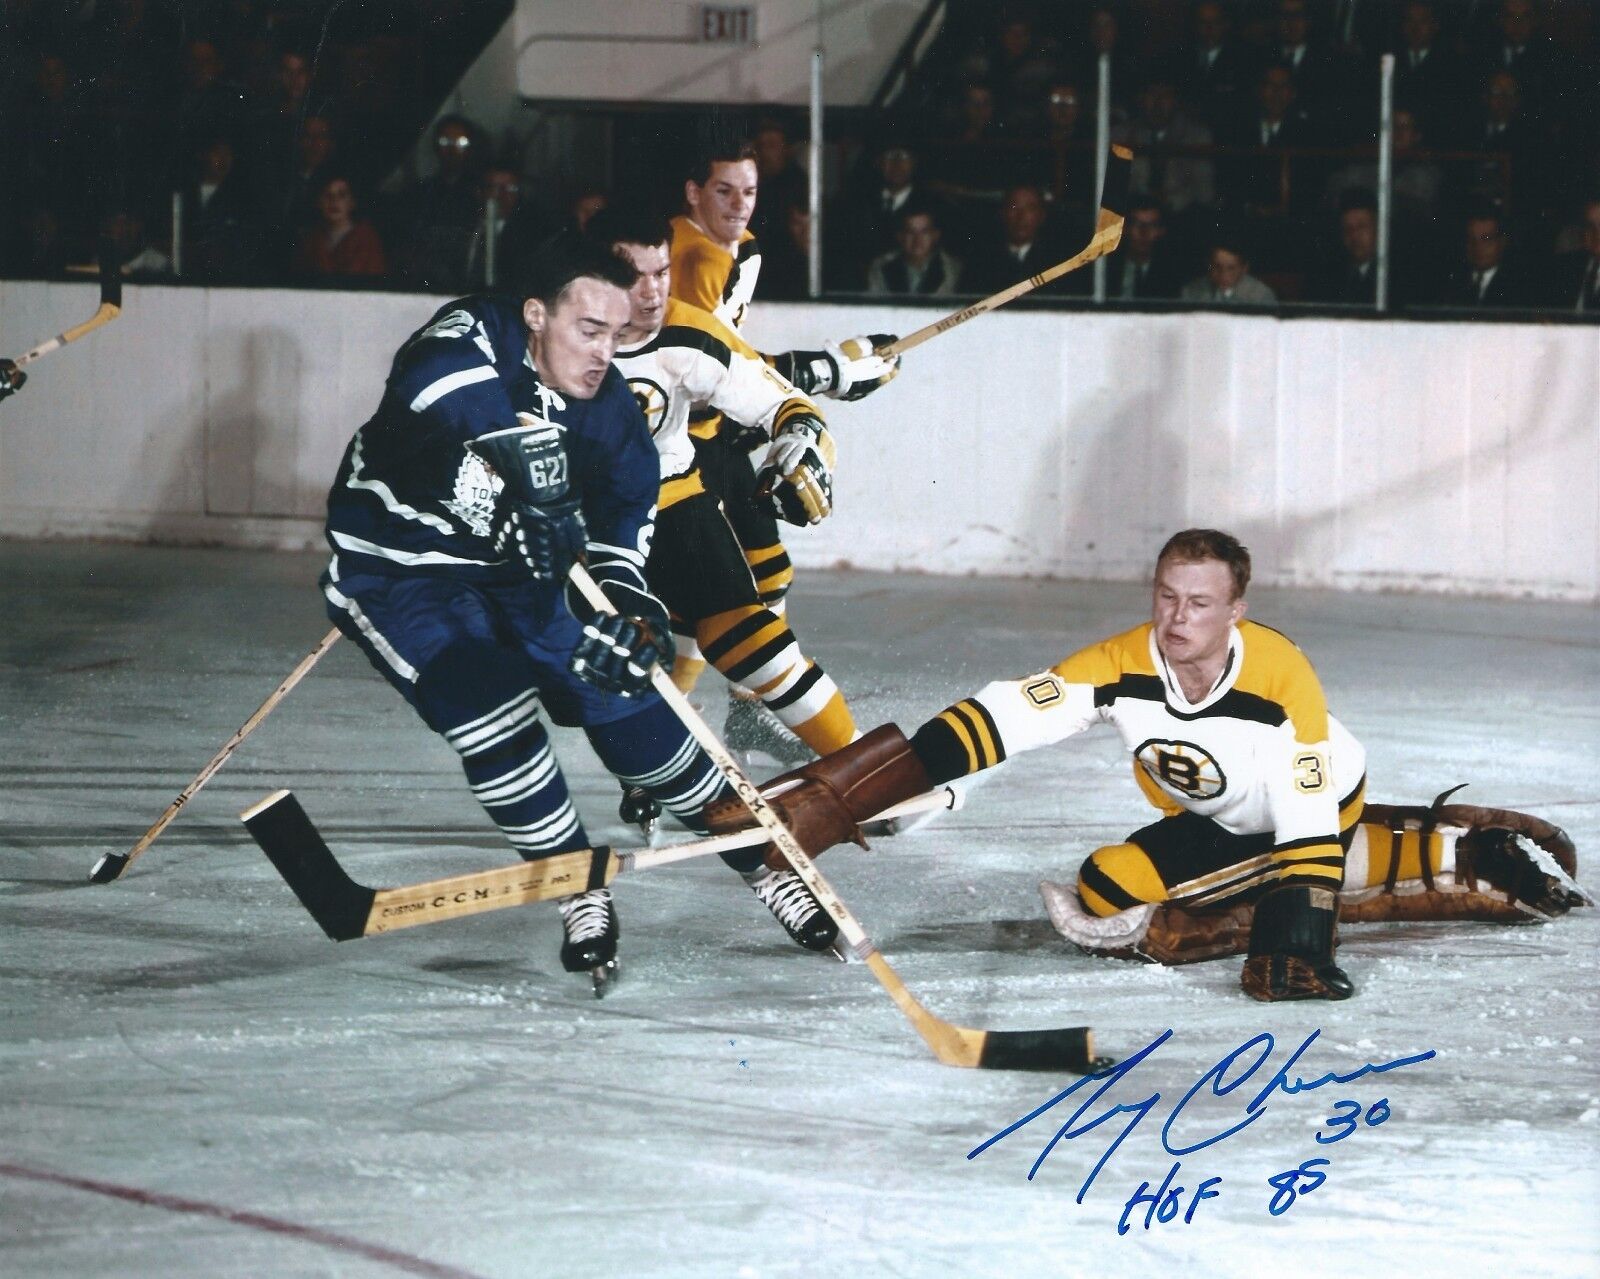 Autographed 8x10 GERRY CHEEVERS HOF 85